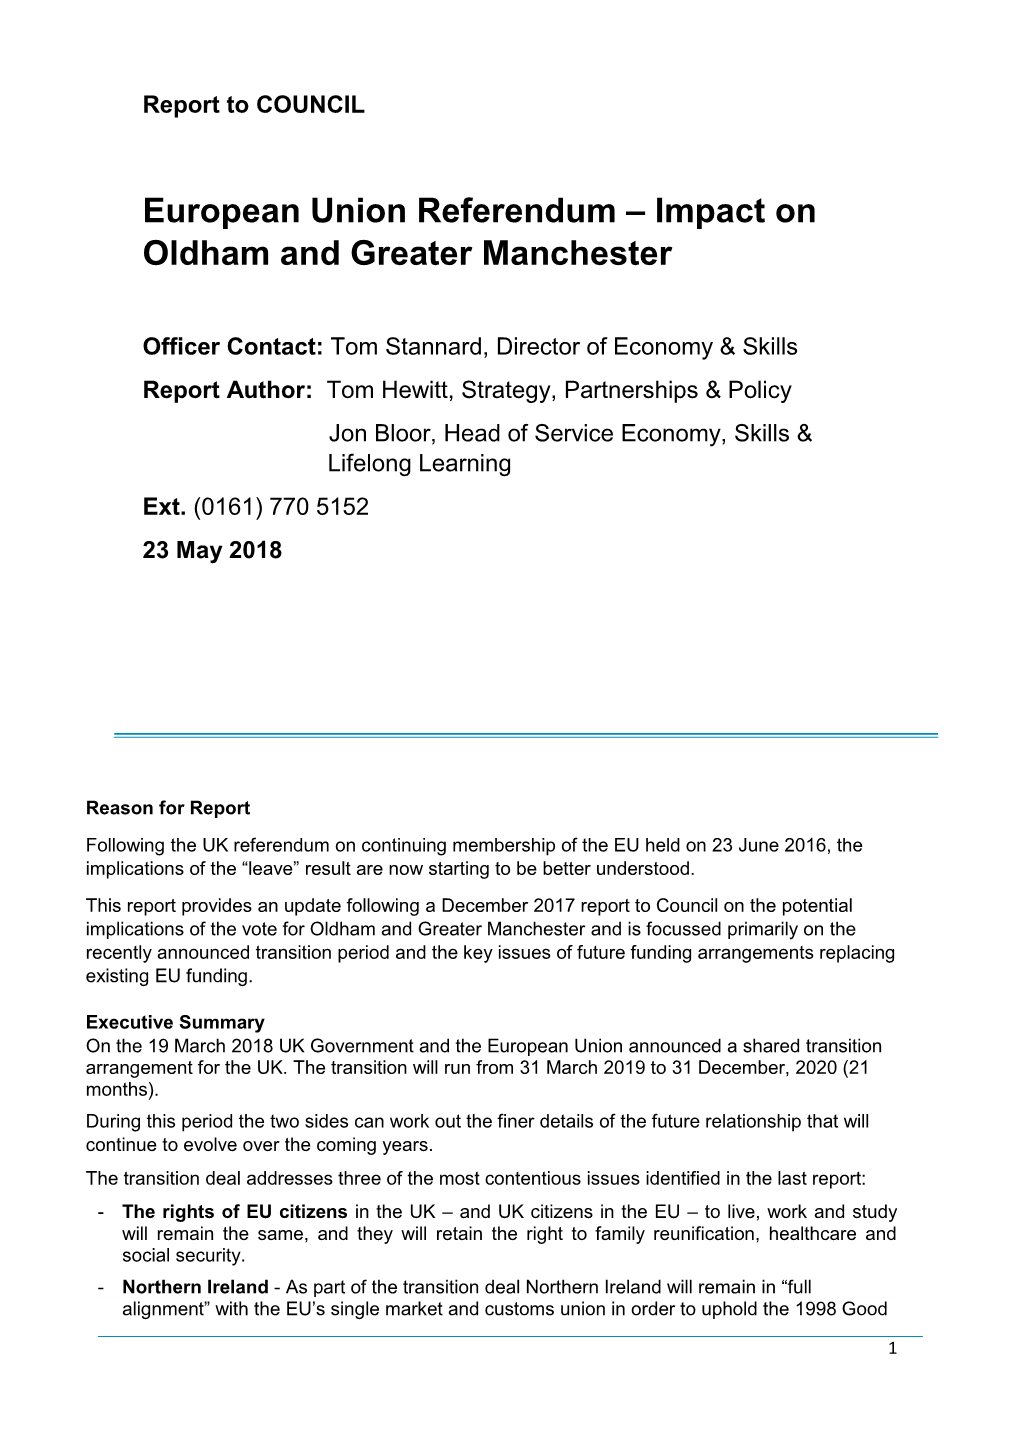 European Union Referendum – Impact on Oldham and Greater Manchester